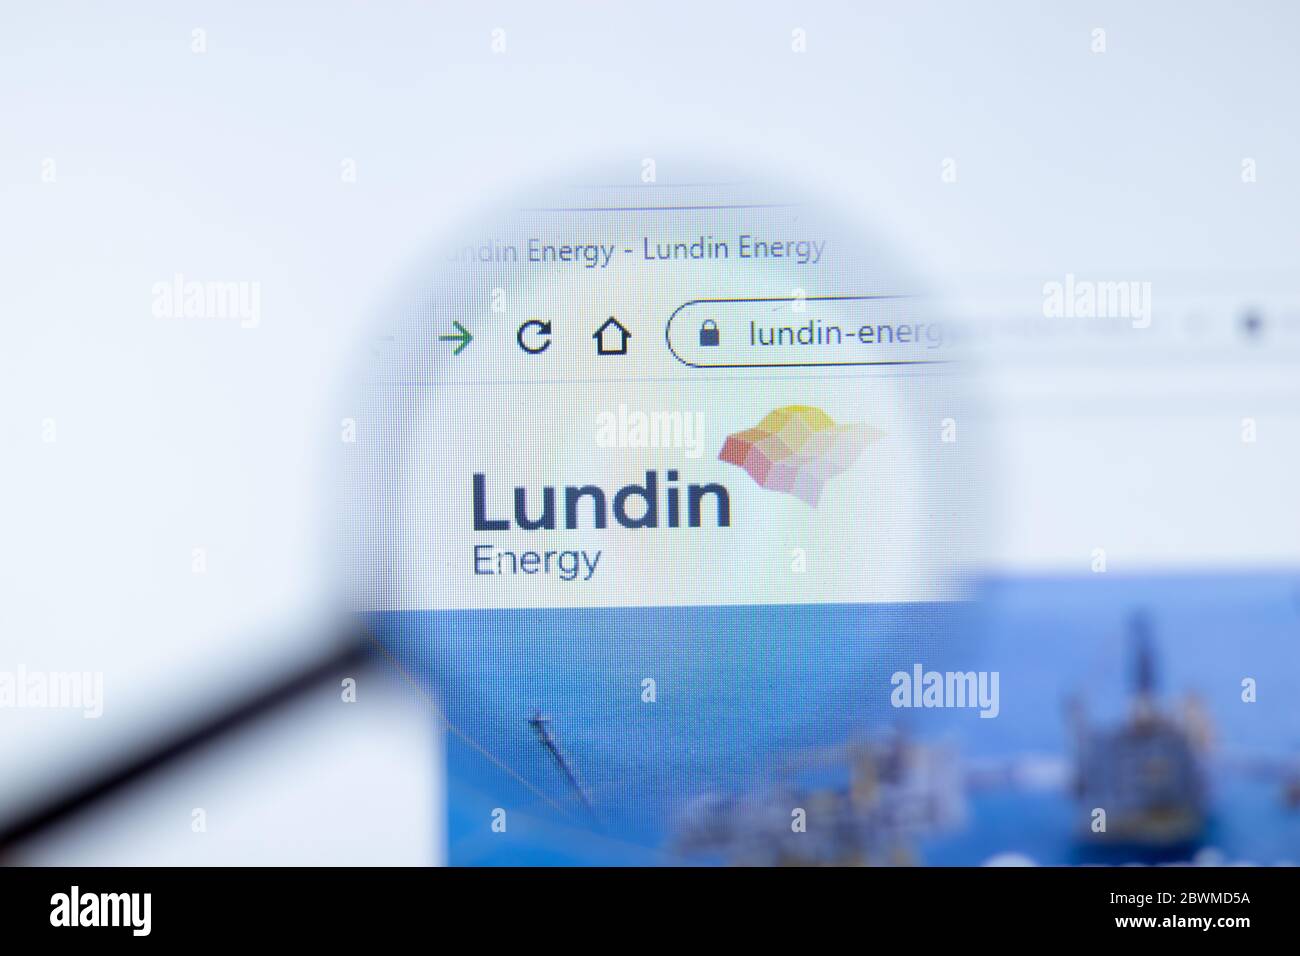 Moscow, Russia - 1 June 2020: Lundin-energy.com website page. Lundin energy Petroleum AB logo on display screen, Illustrative Editorial. Stock Photo